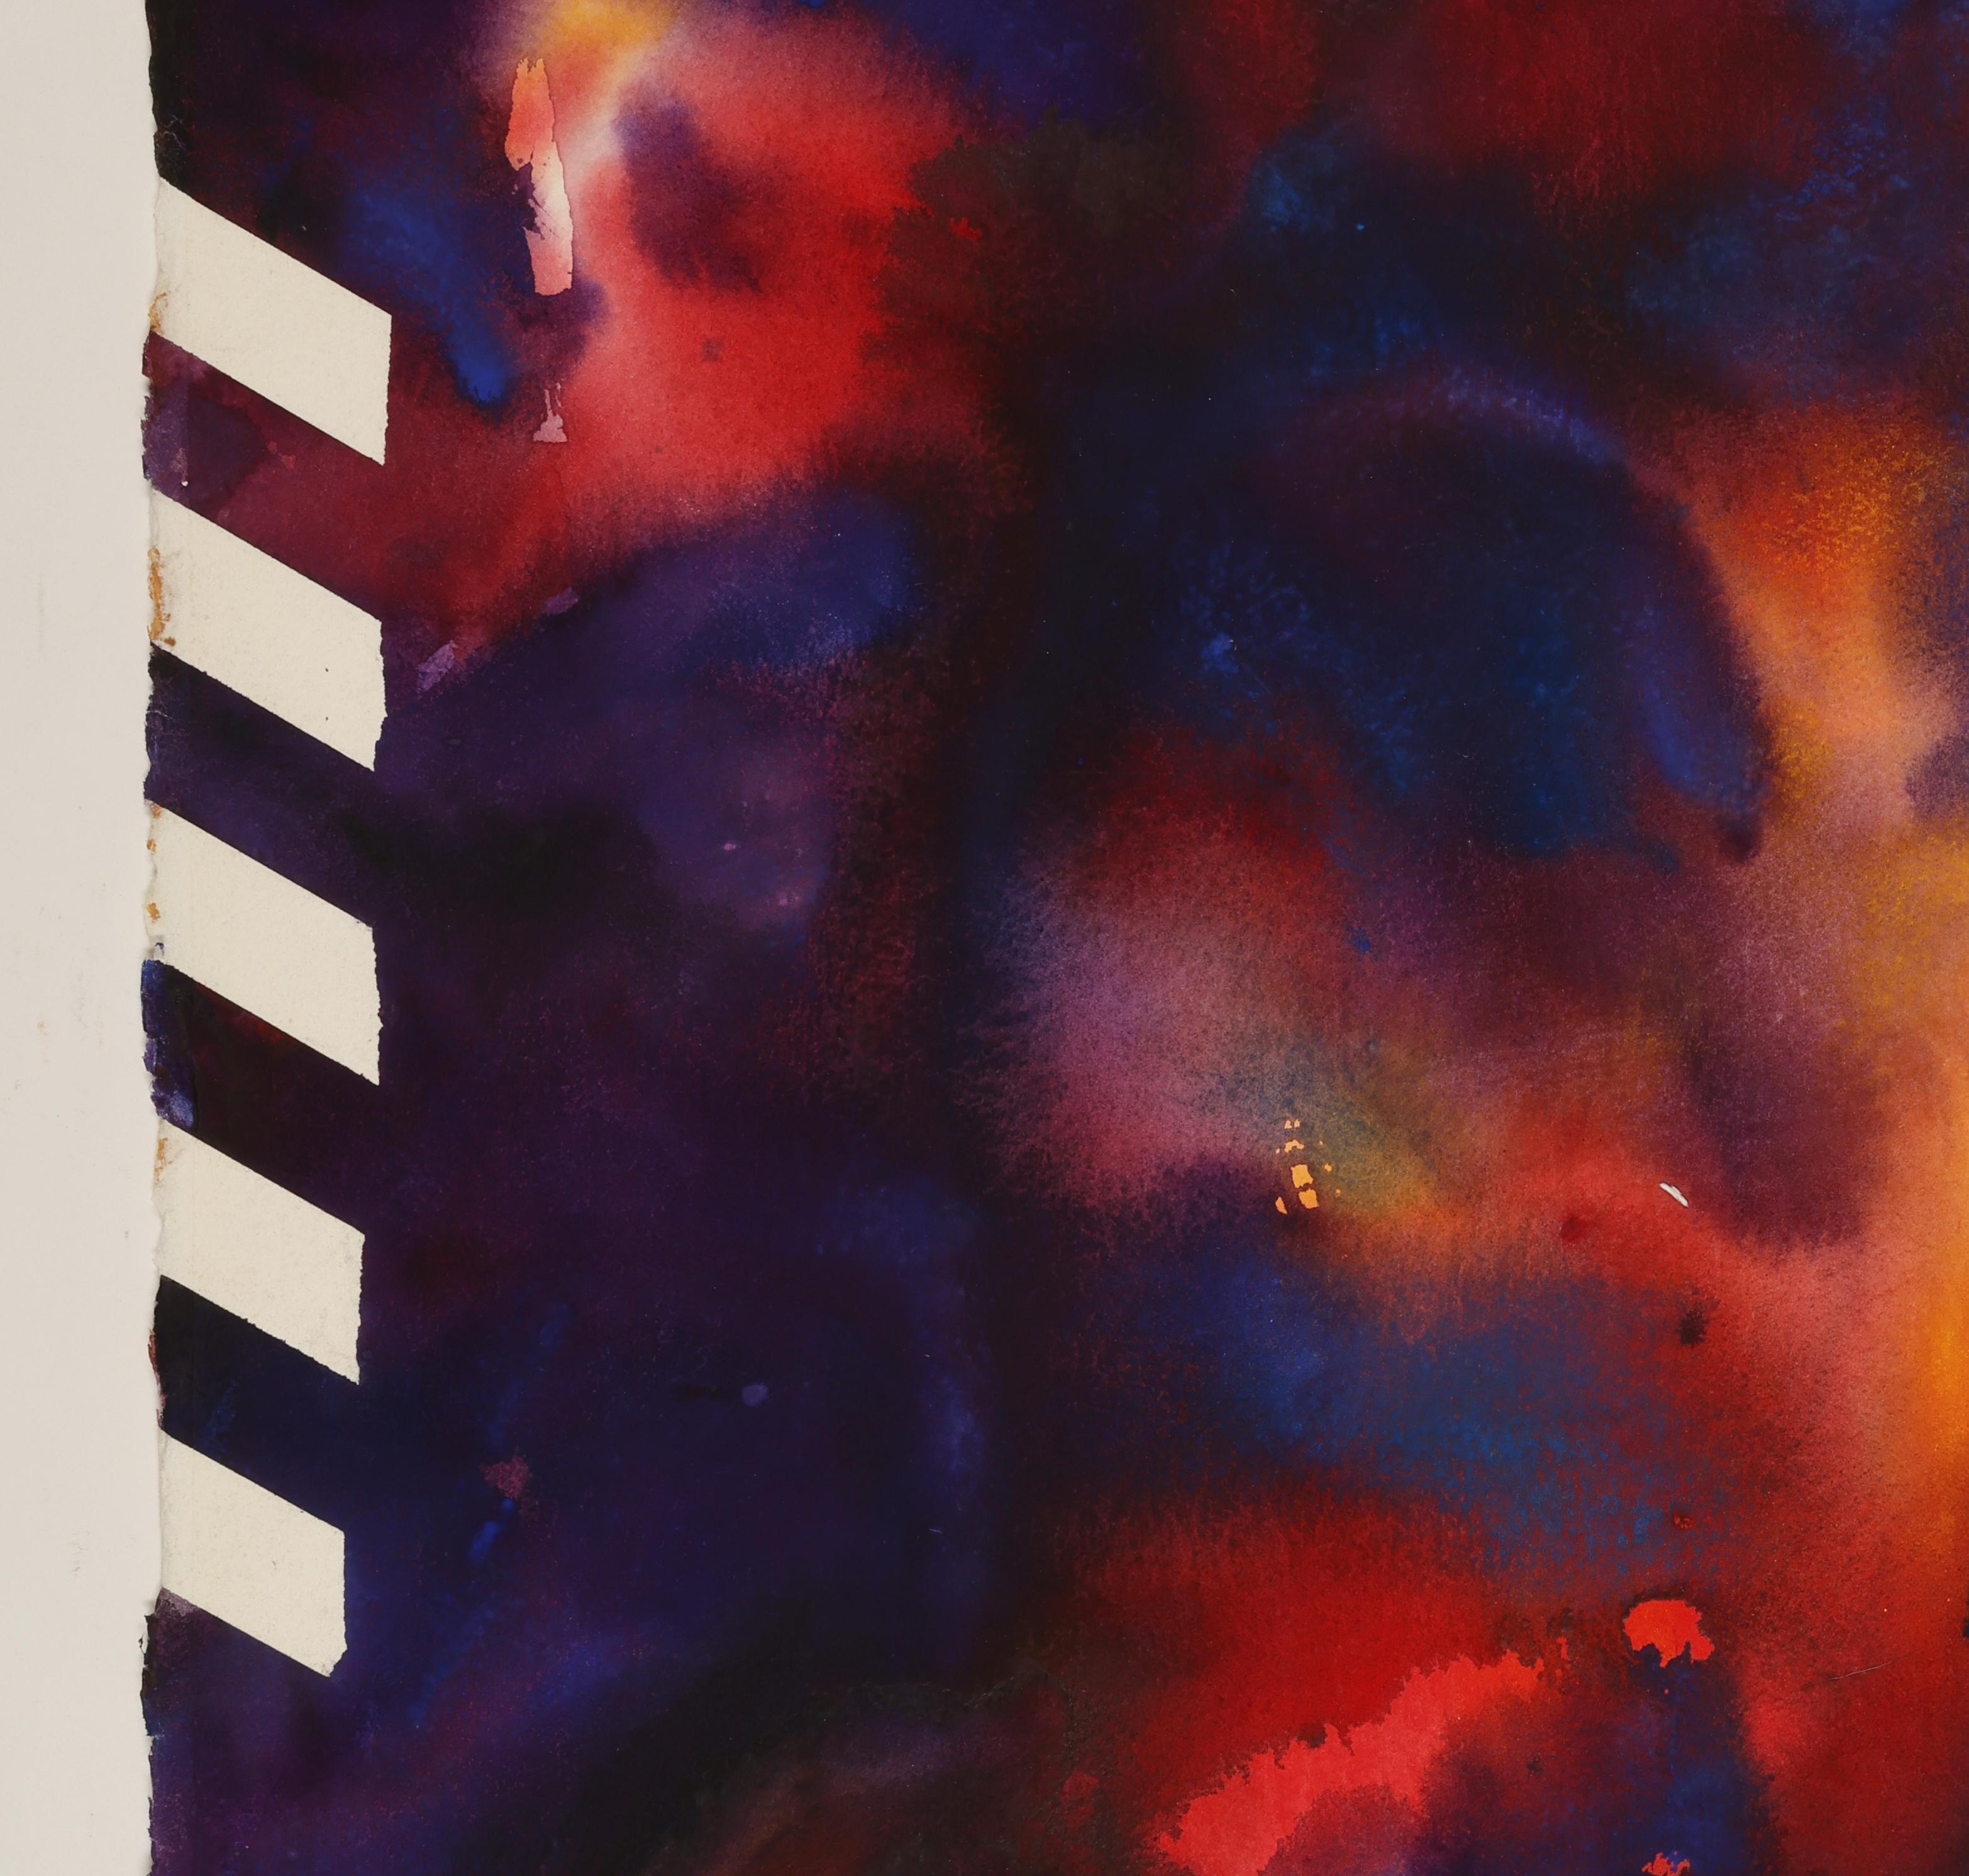 Abstract Watercolor Painting, 'Design for Light', c. 2000 by David Ruth For Sale 3